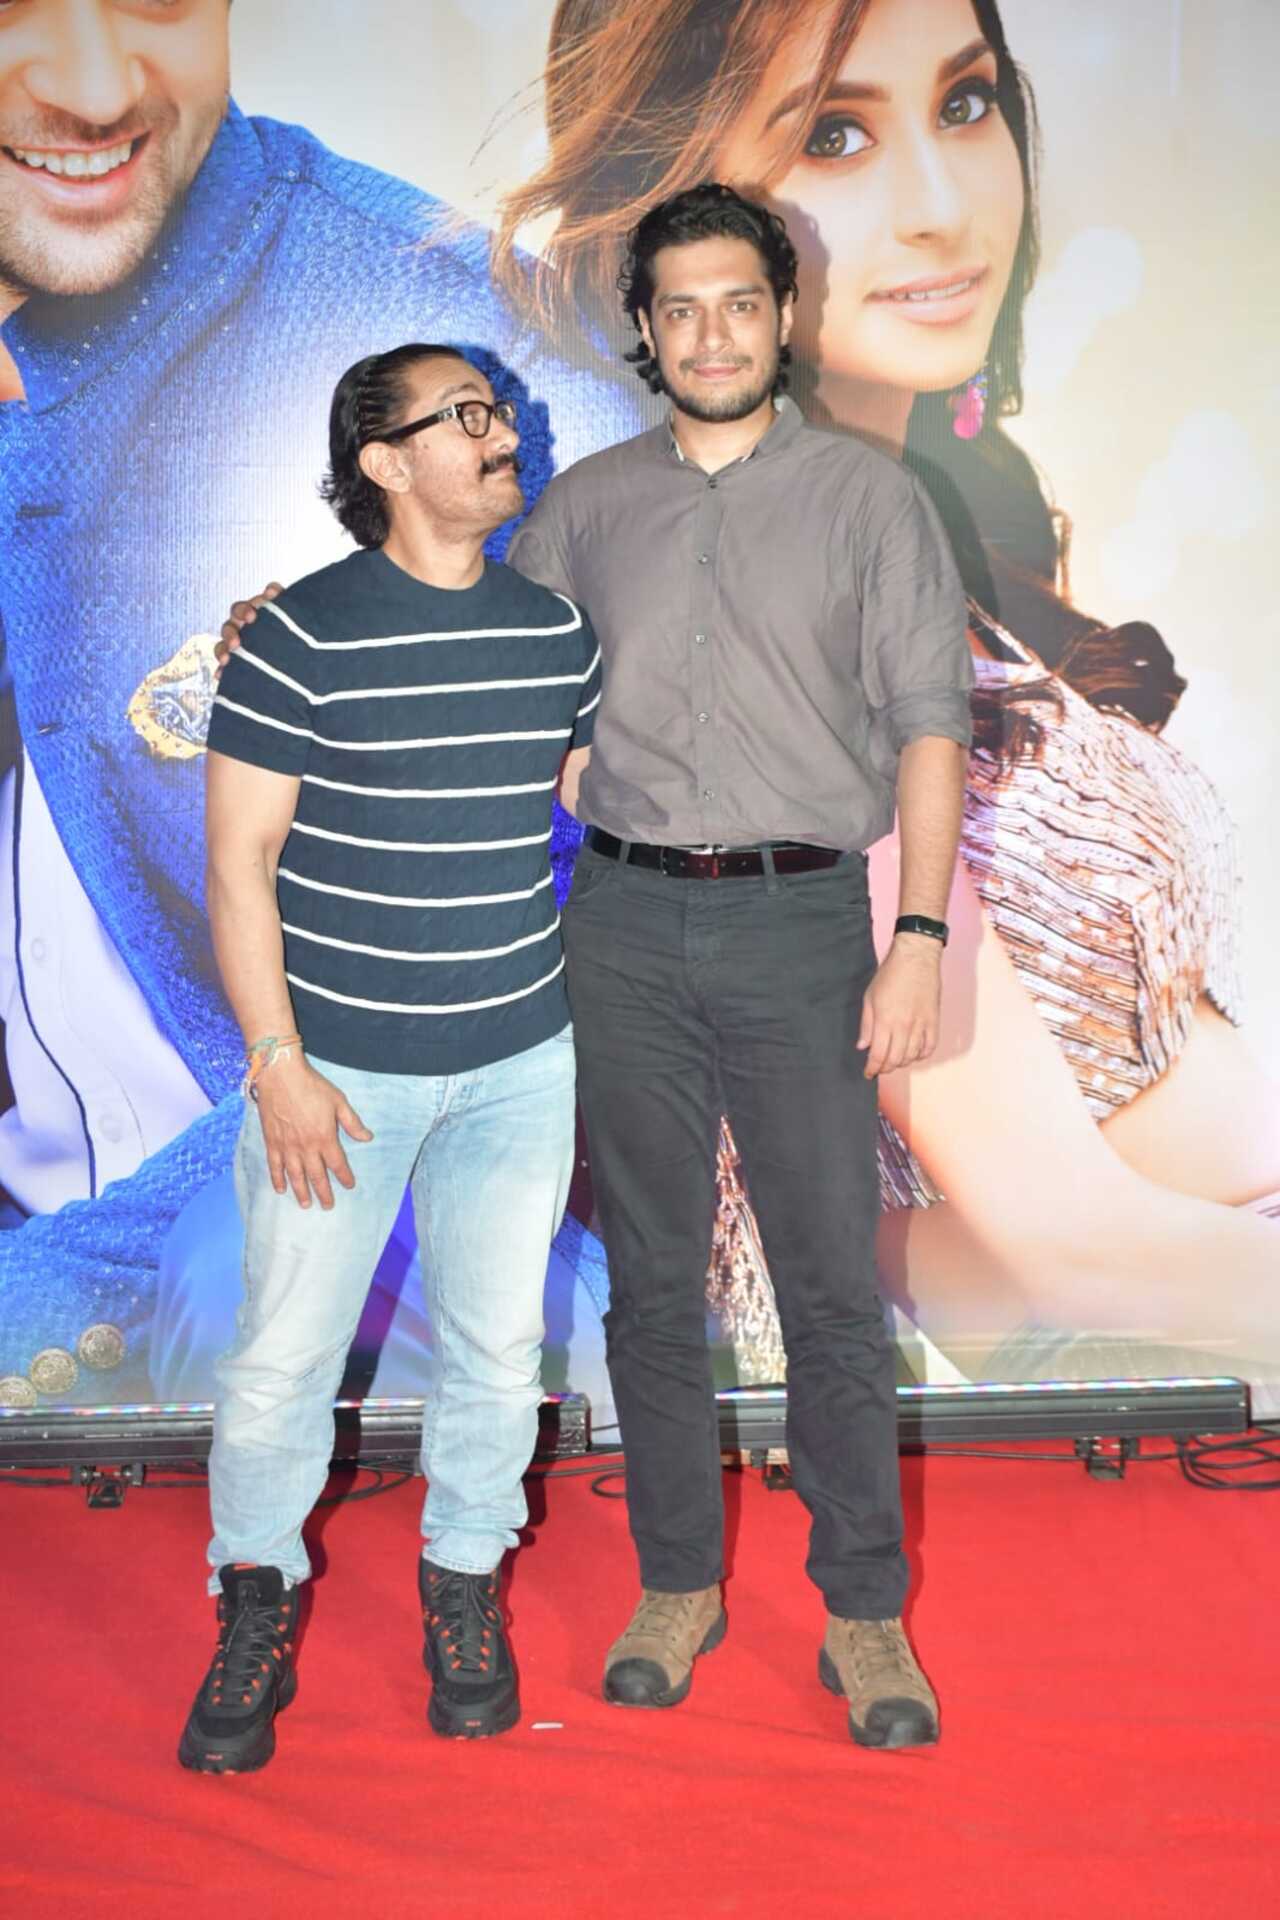 Aamir Khan looks up to his son as they pose together for the camera